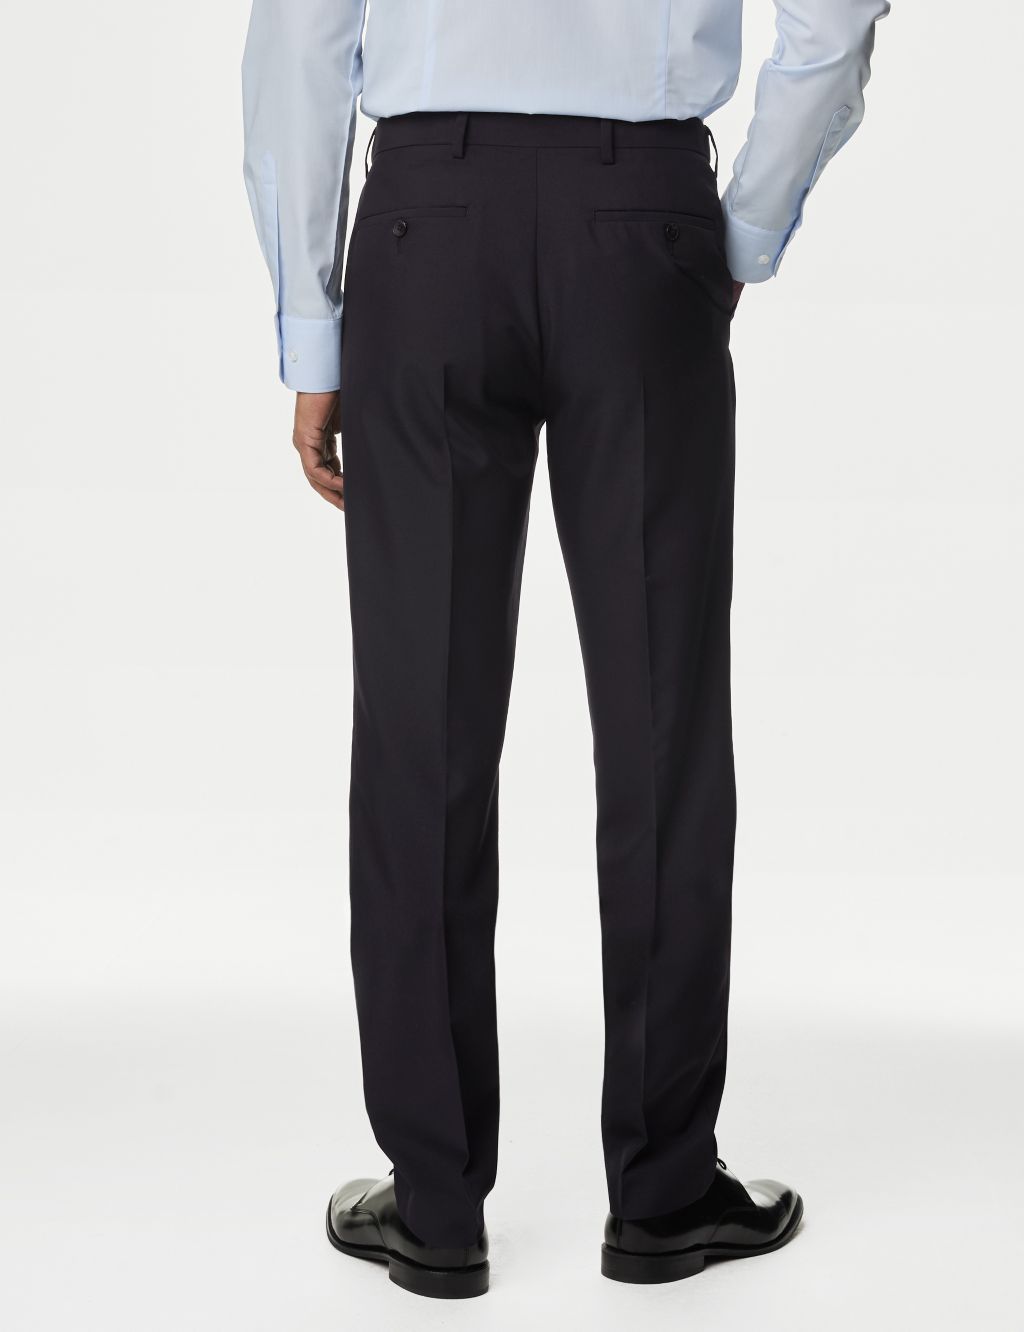 Slim Fit Trouser with Active Waist image 5